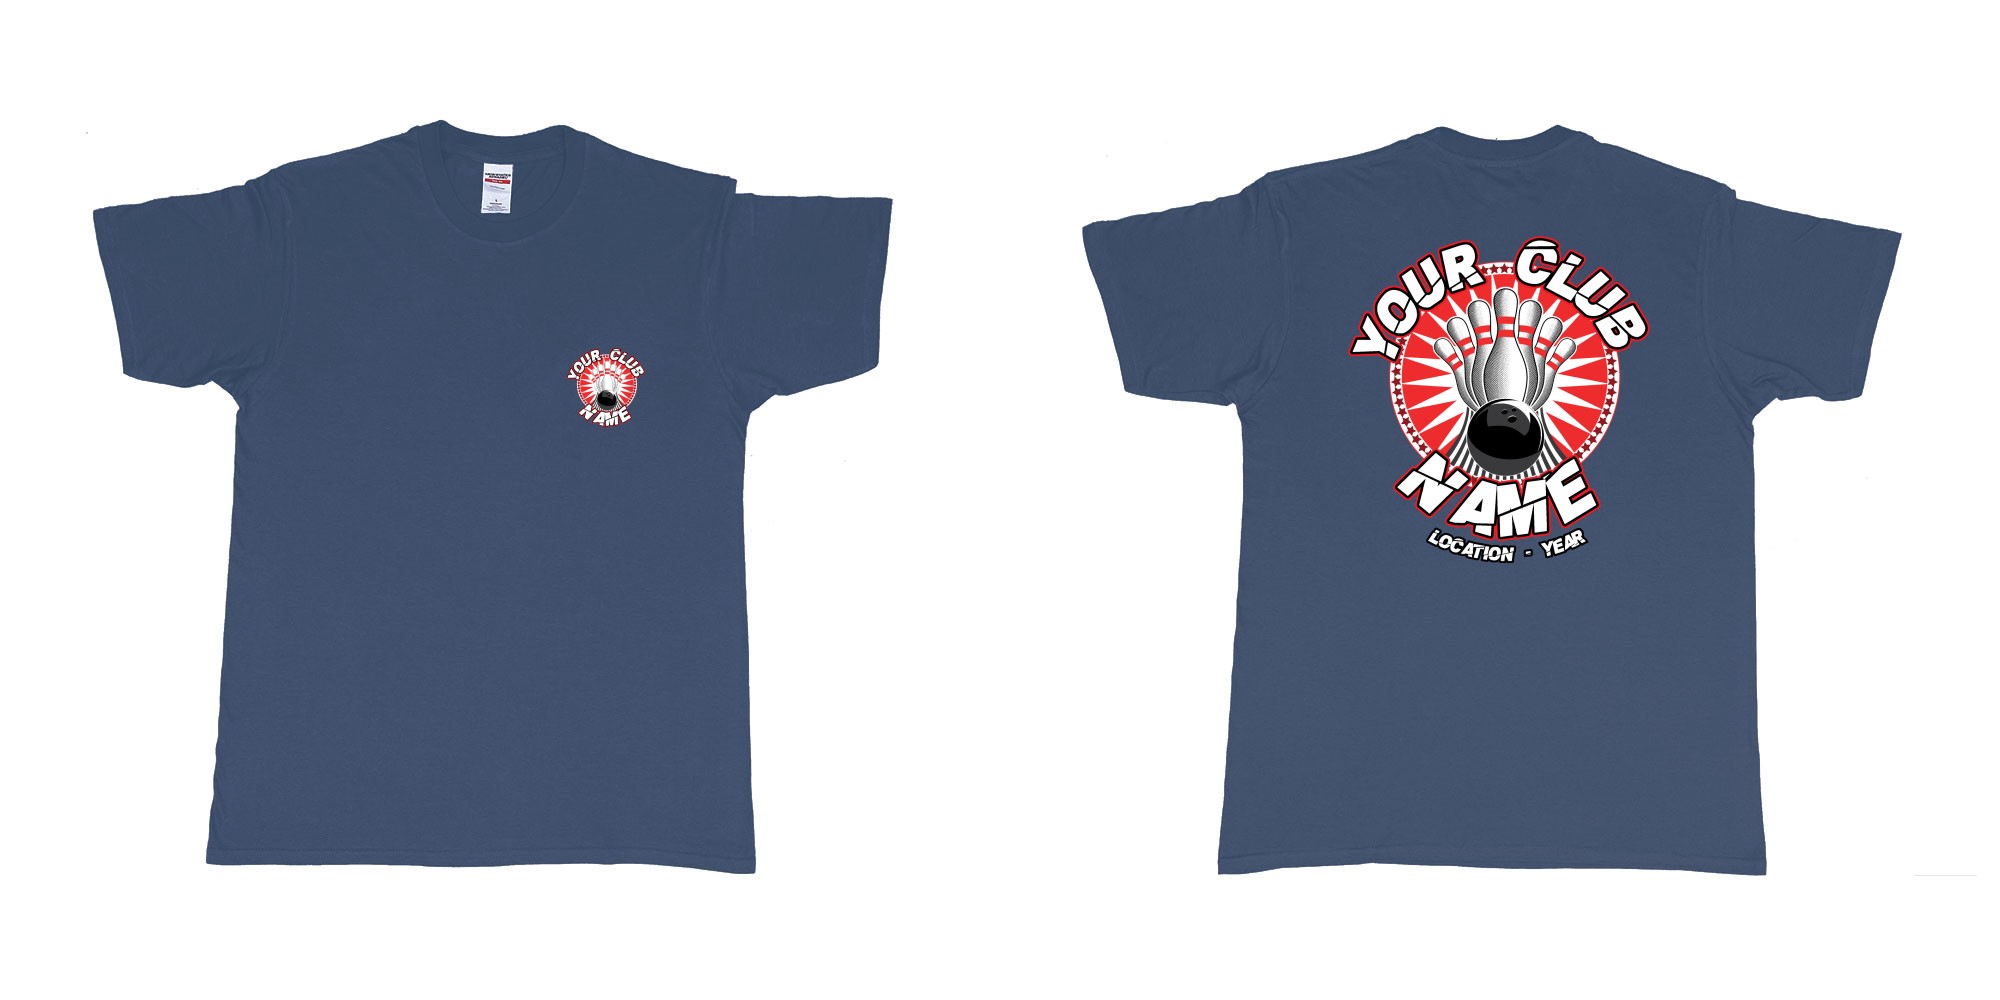 Custom tshirt design TPW strike bowling in fabric color navy choice your own text made in Bali by The Pirate Way